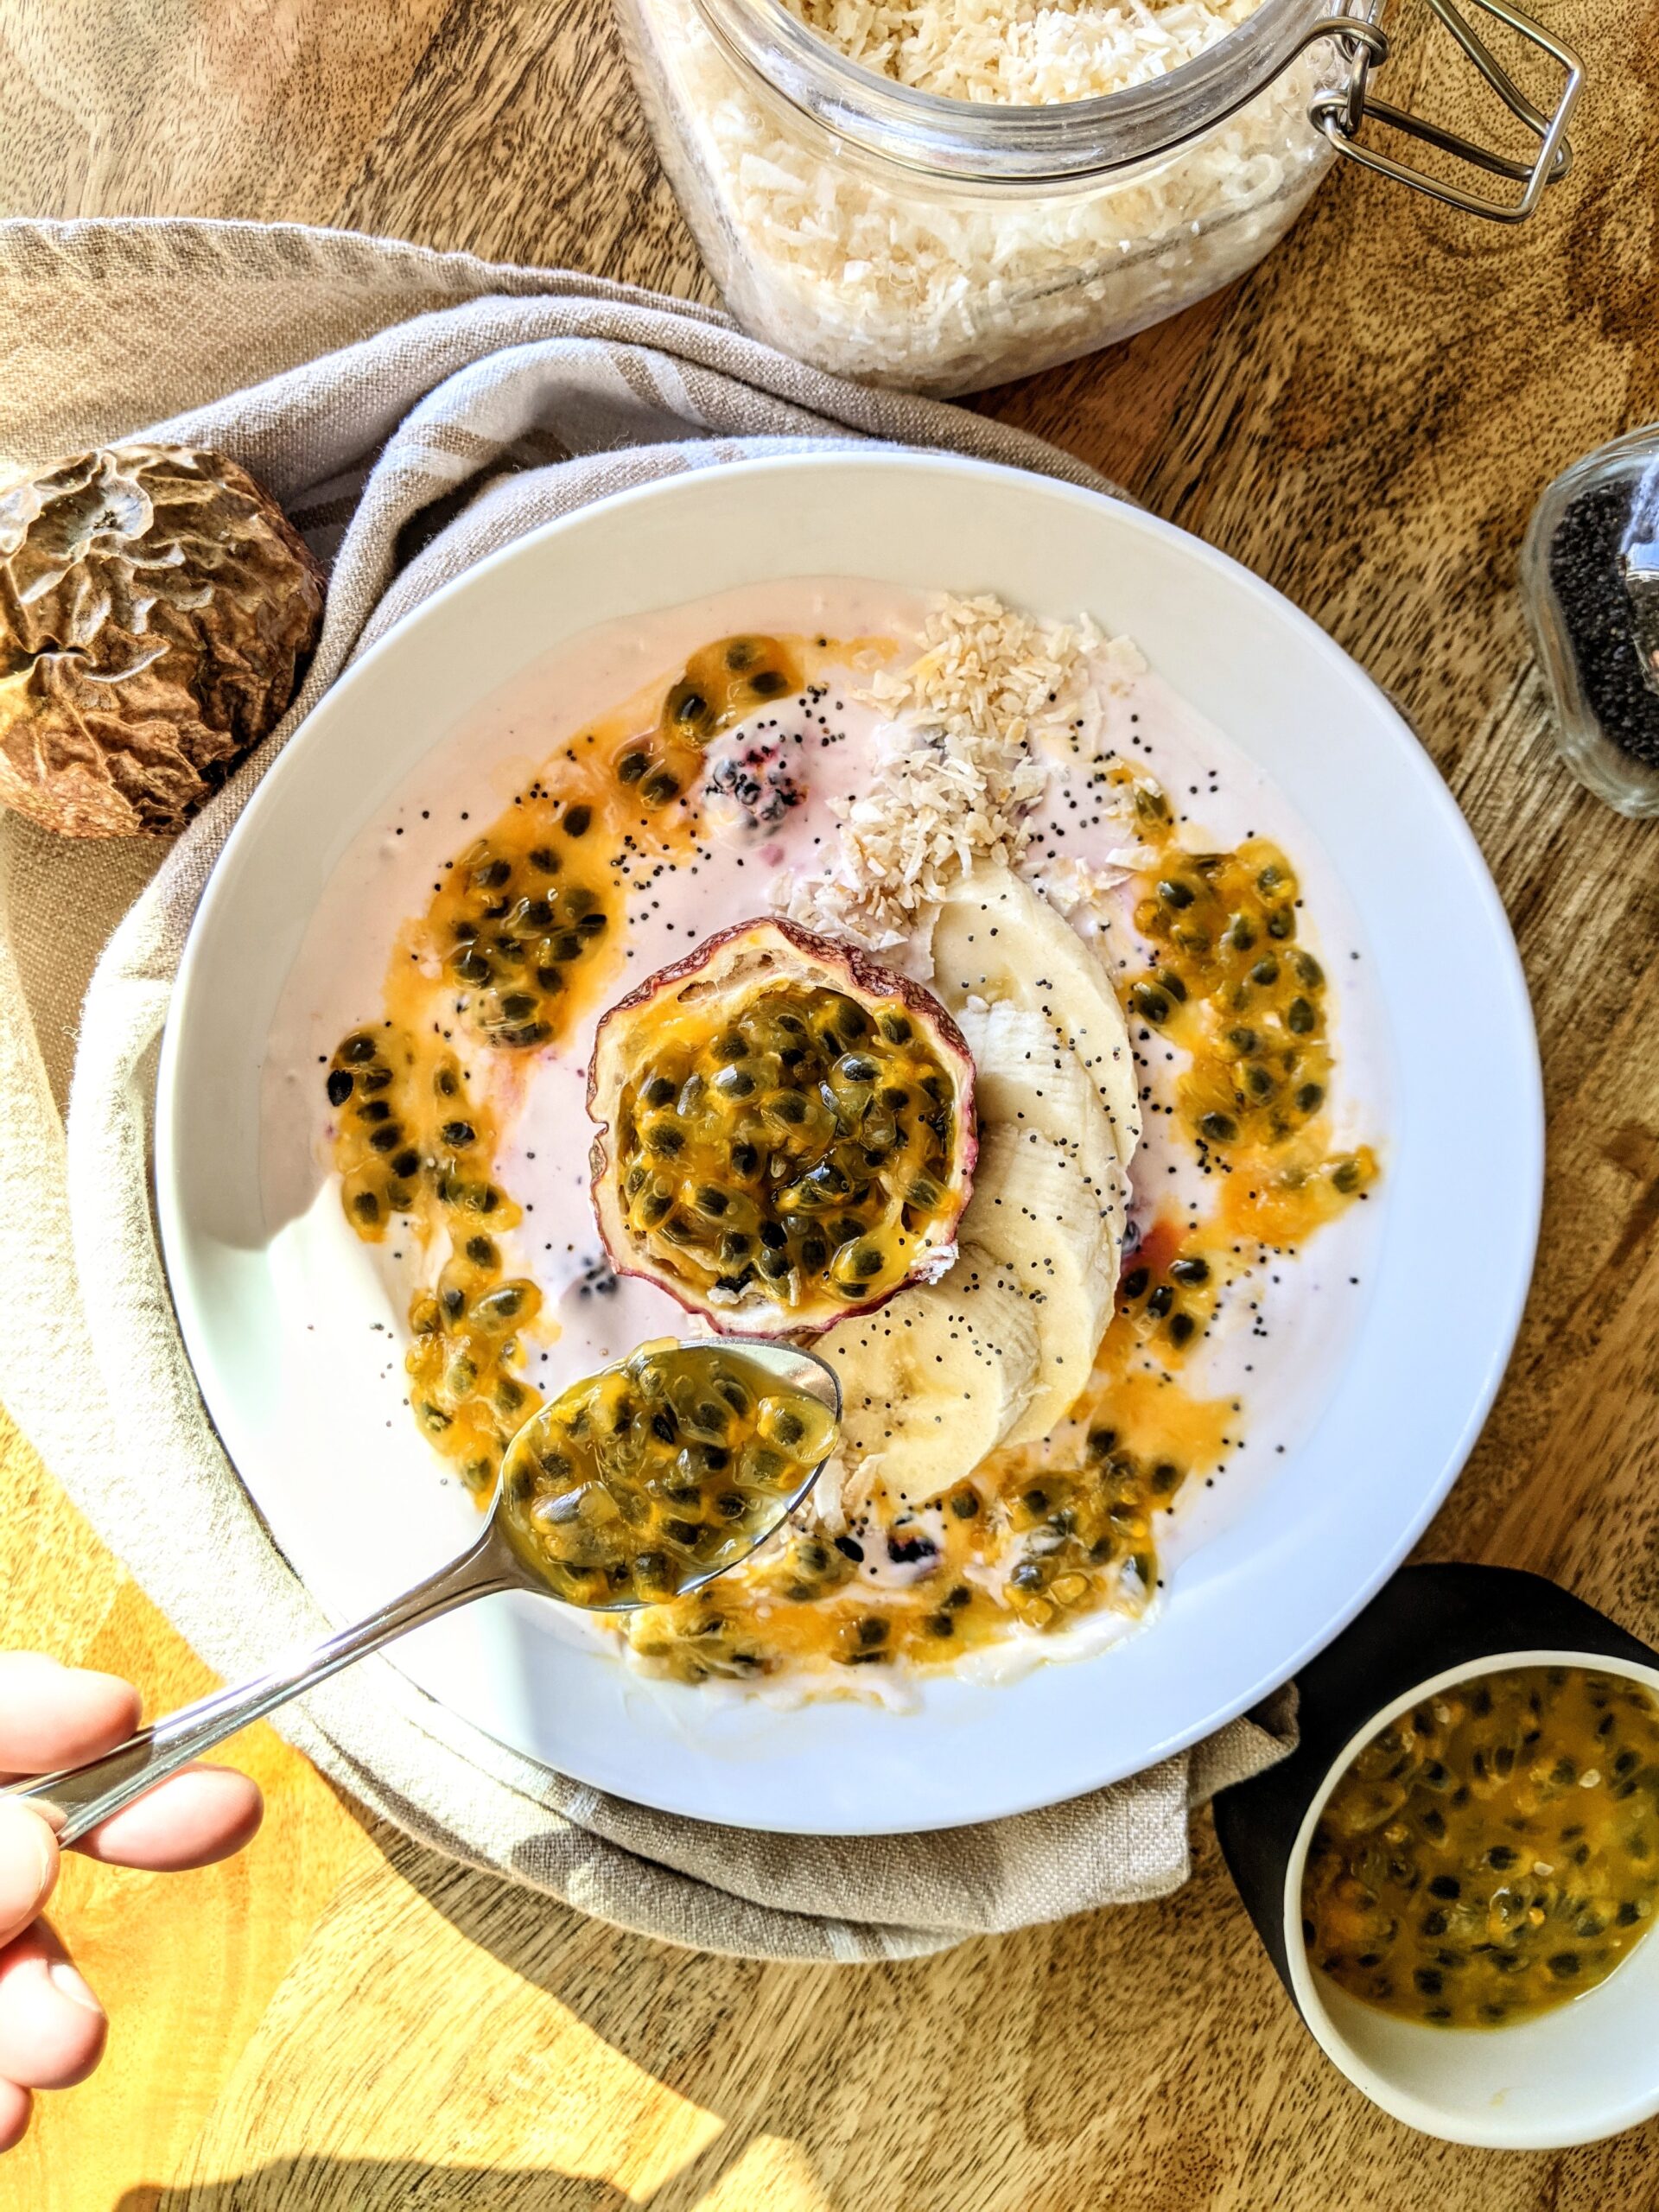 A vibrant breakfast bowl made up of homemade berry yogurt, toasted coconut flakes, sliced banana, chia seeds, and a swirl of ripe passionfruit pulp.